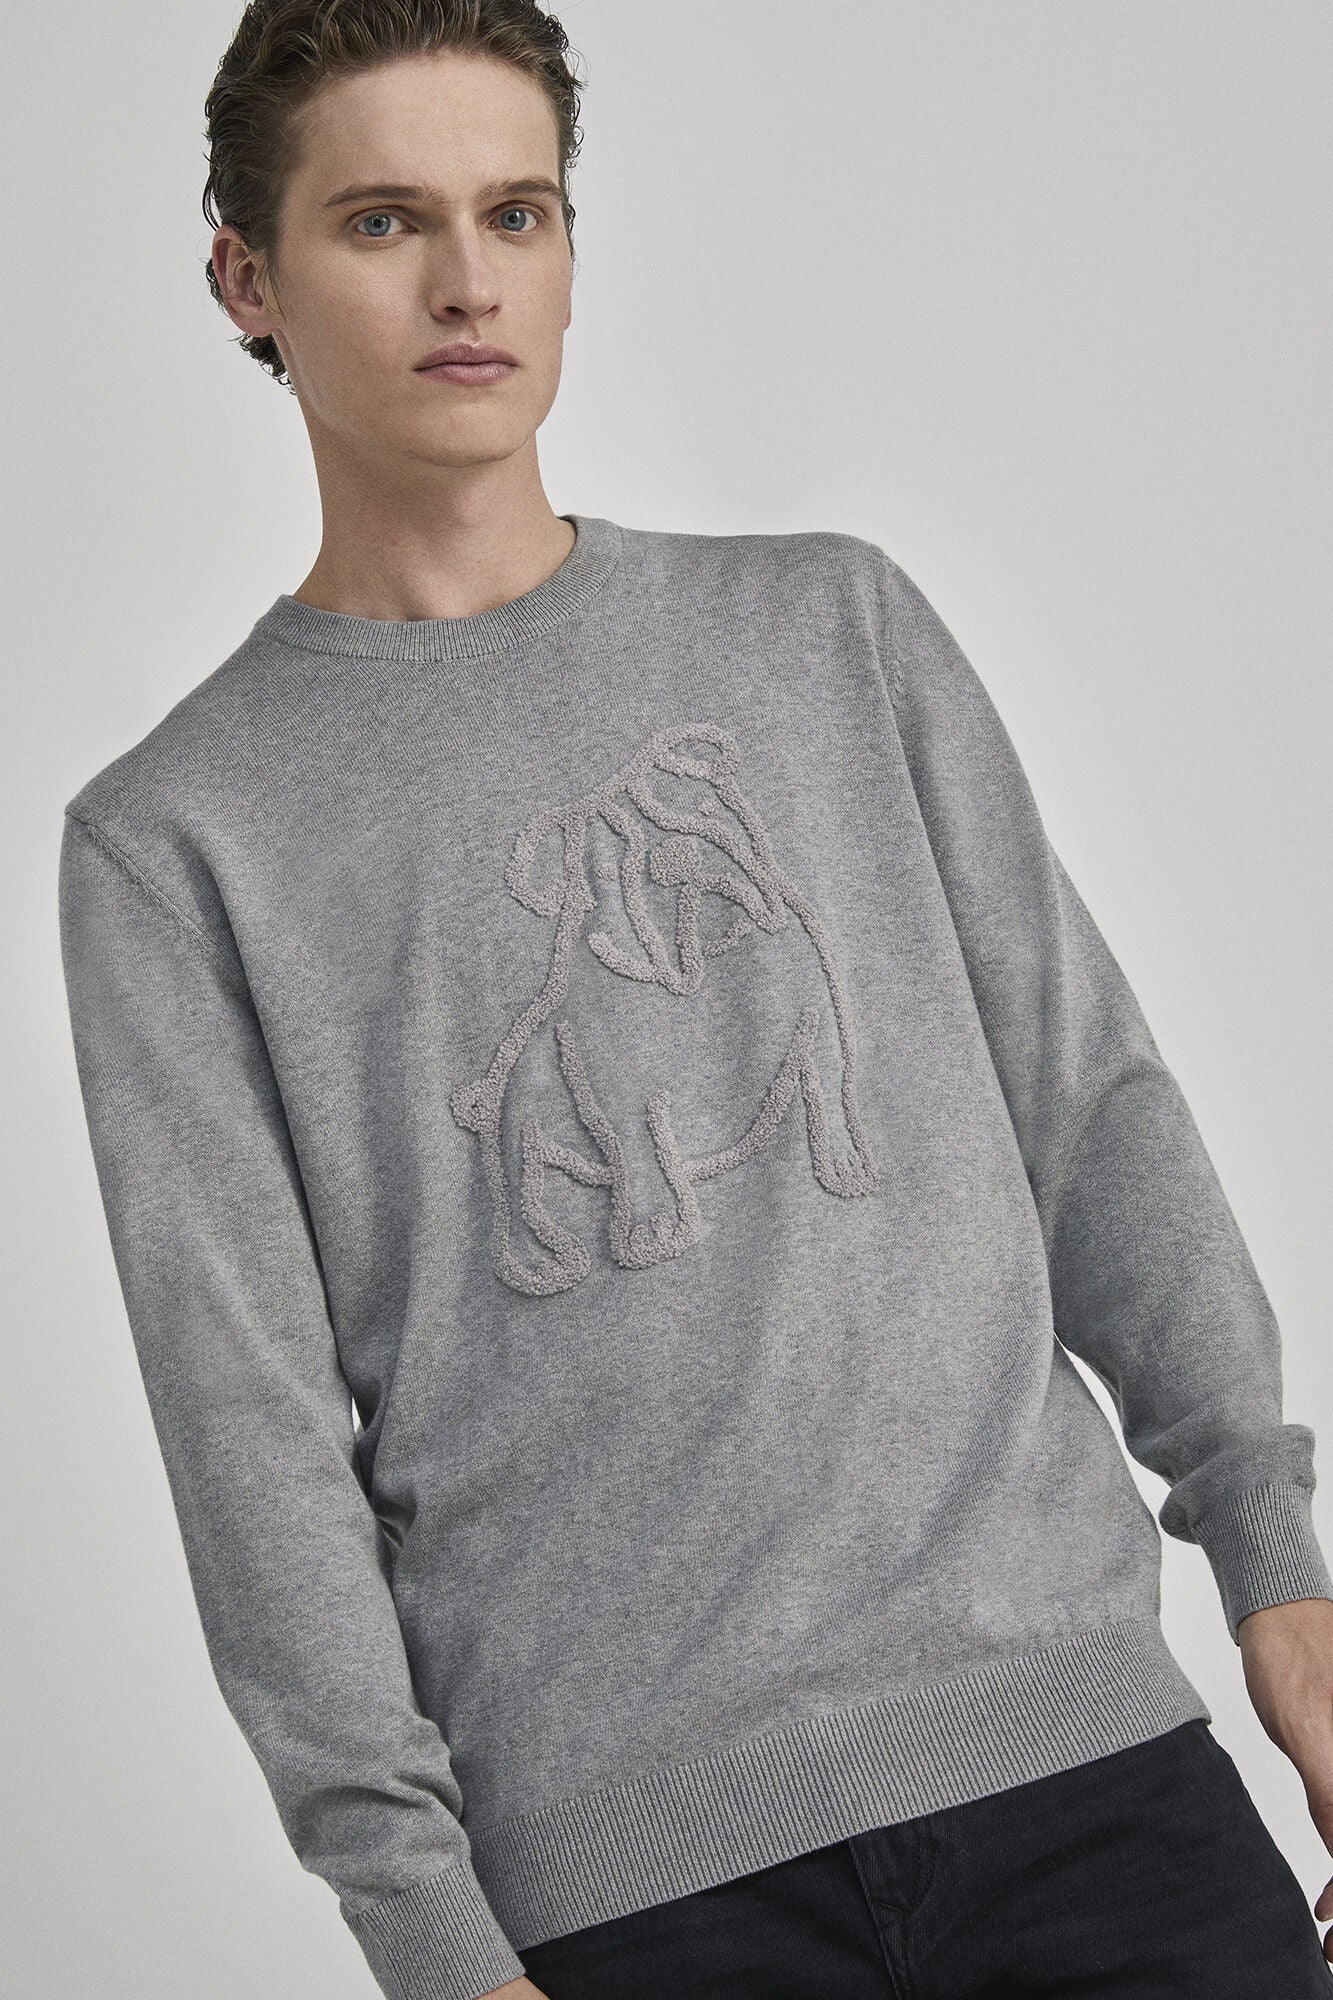 Jumper with dog embroidery